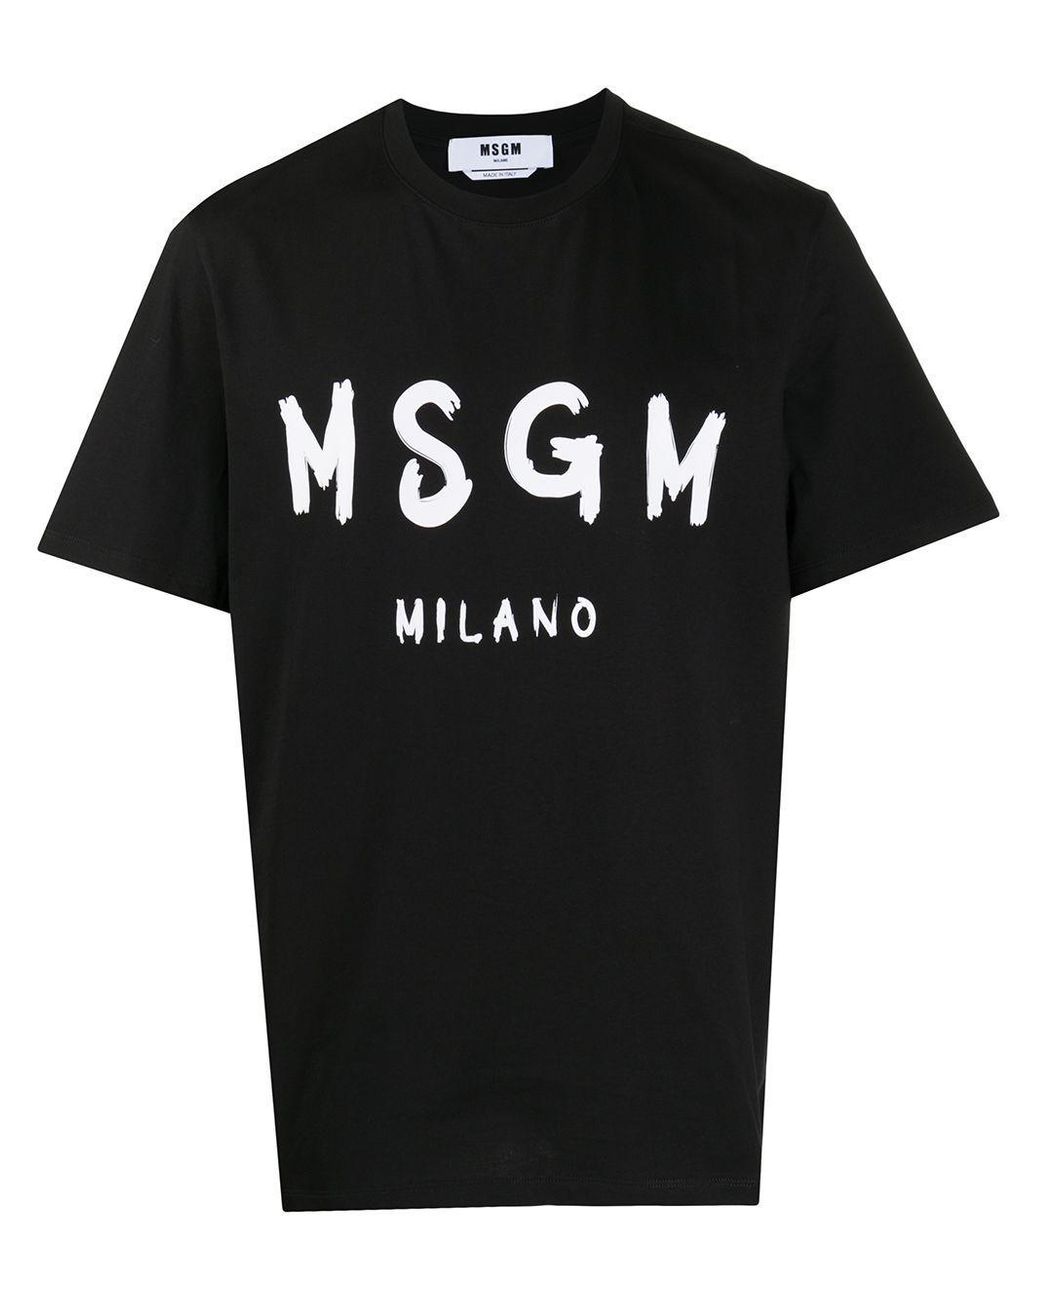 MSGM Cotton T-shirt in Black for Men - Lyst